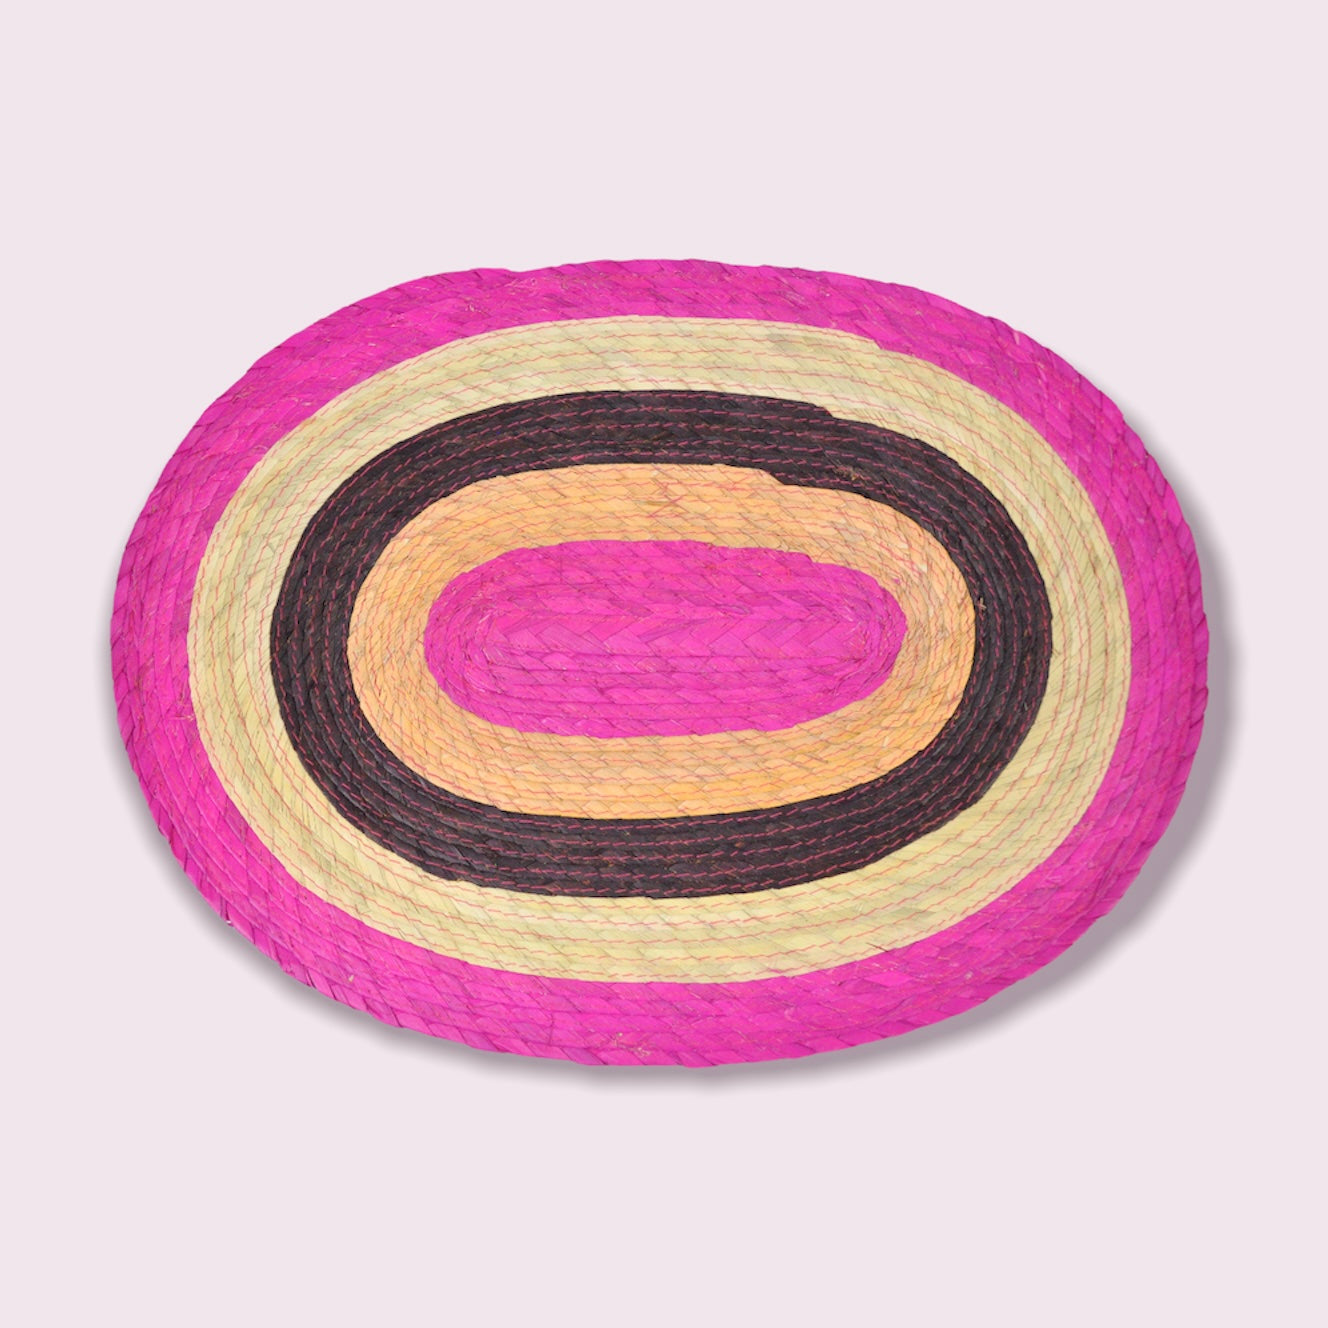 Carnival Oval Placemats Fuchsia & Brown